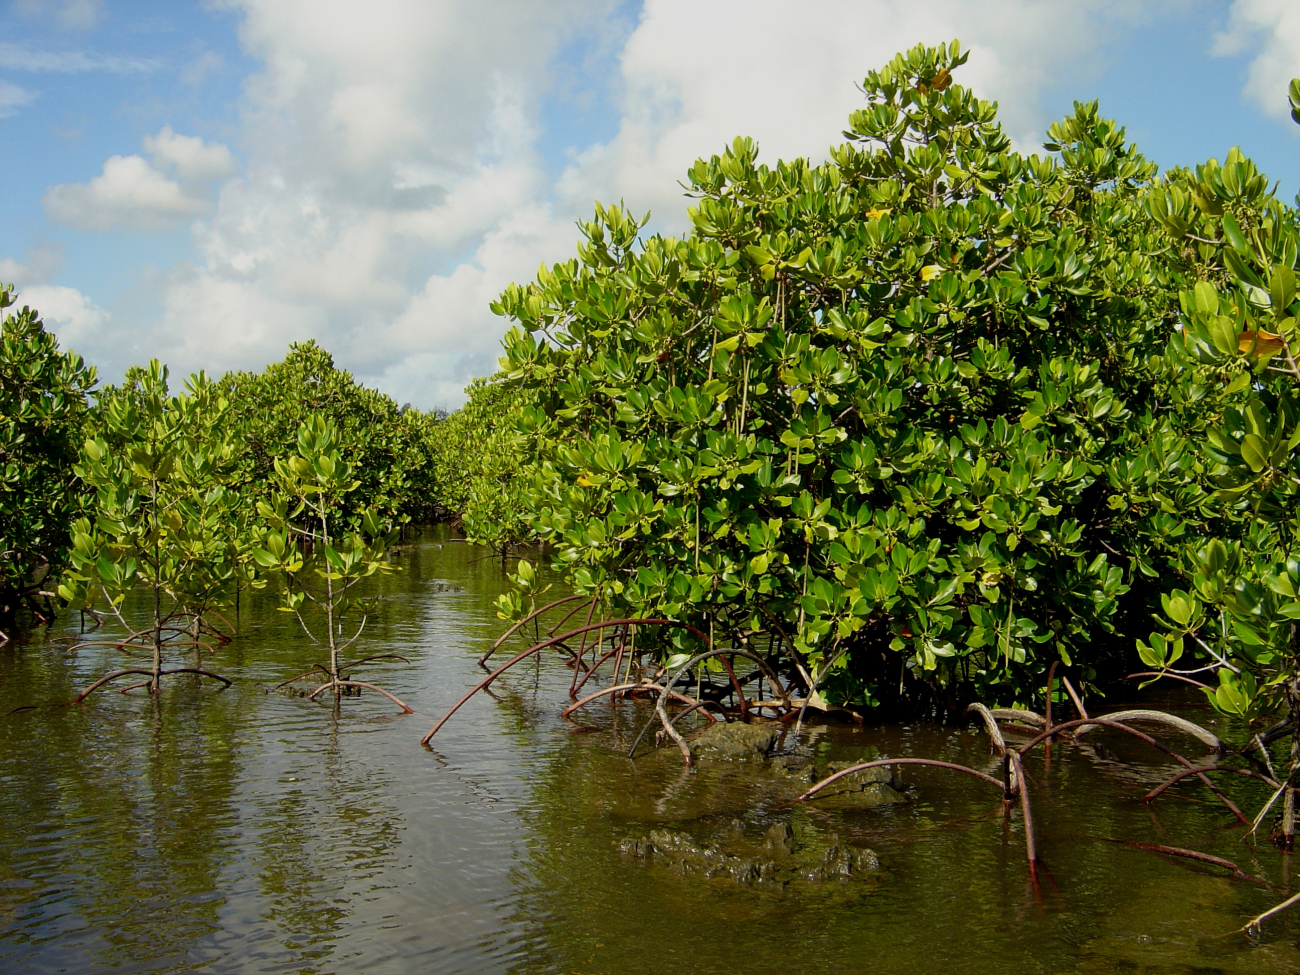 Mangroves growing in the coral rocks of the Guam coastline